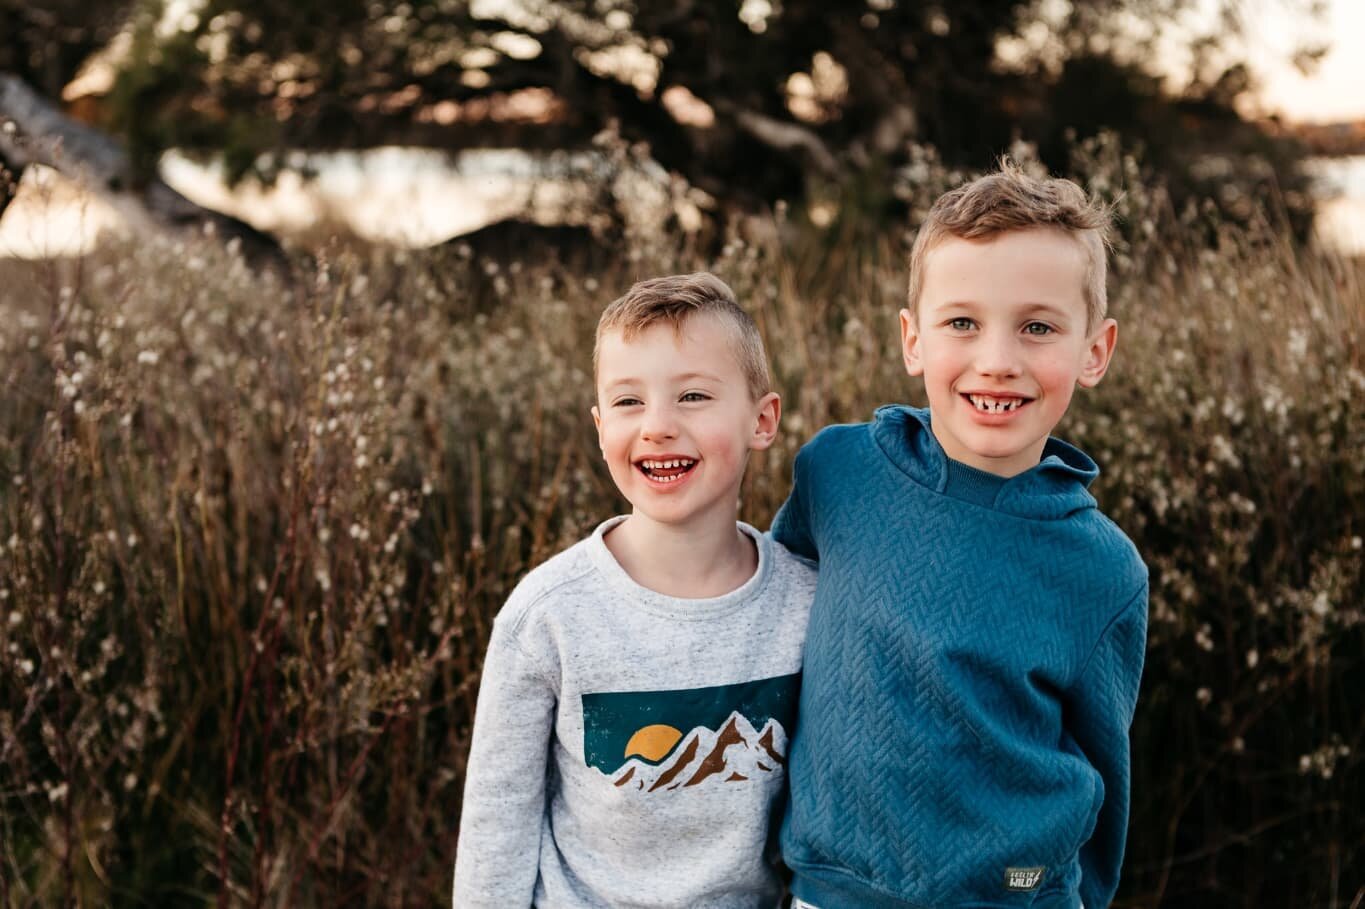 As thick as thieves. 
I've photographed these boys many times over the years and they always say they're each other's best friend ❤️

#perthphotographer #perthfamilyphotographer #perthmamas #perthmums #perthlife #ourclickdays #unconventionaltogs #sto